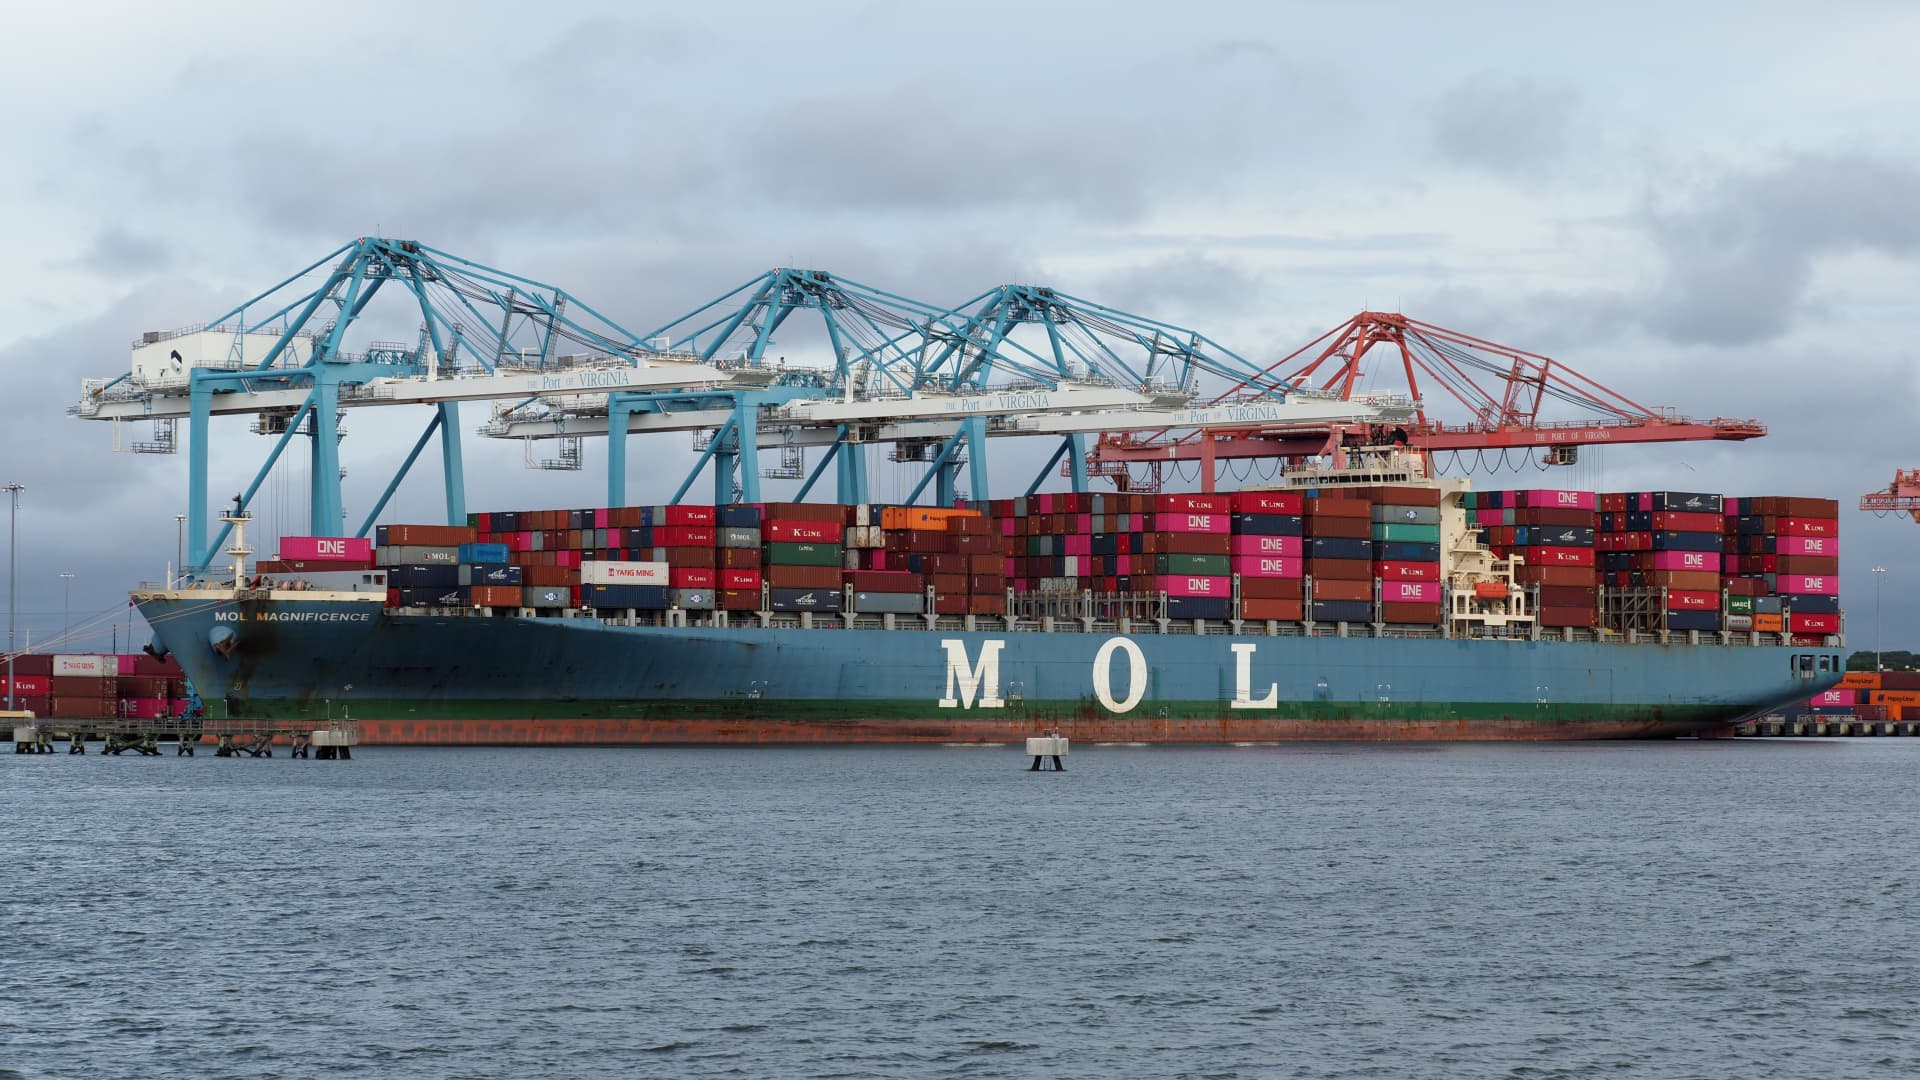 Mitsui Osk Lines ship MOL Magnificence docked at one of Norfolk's port terminals.